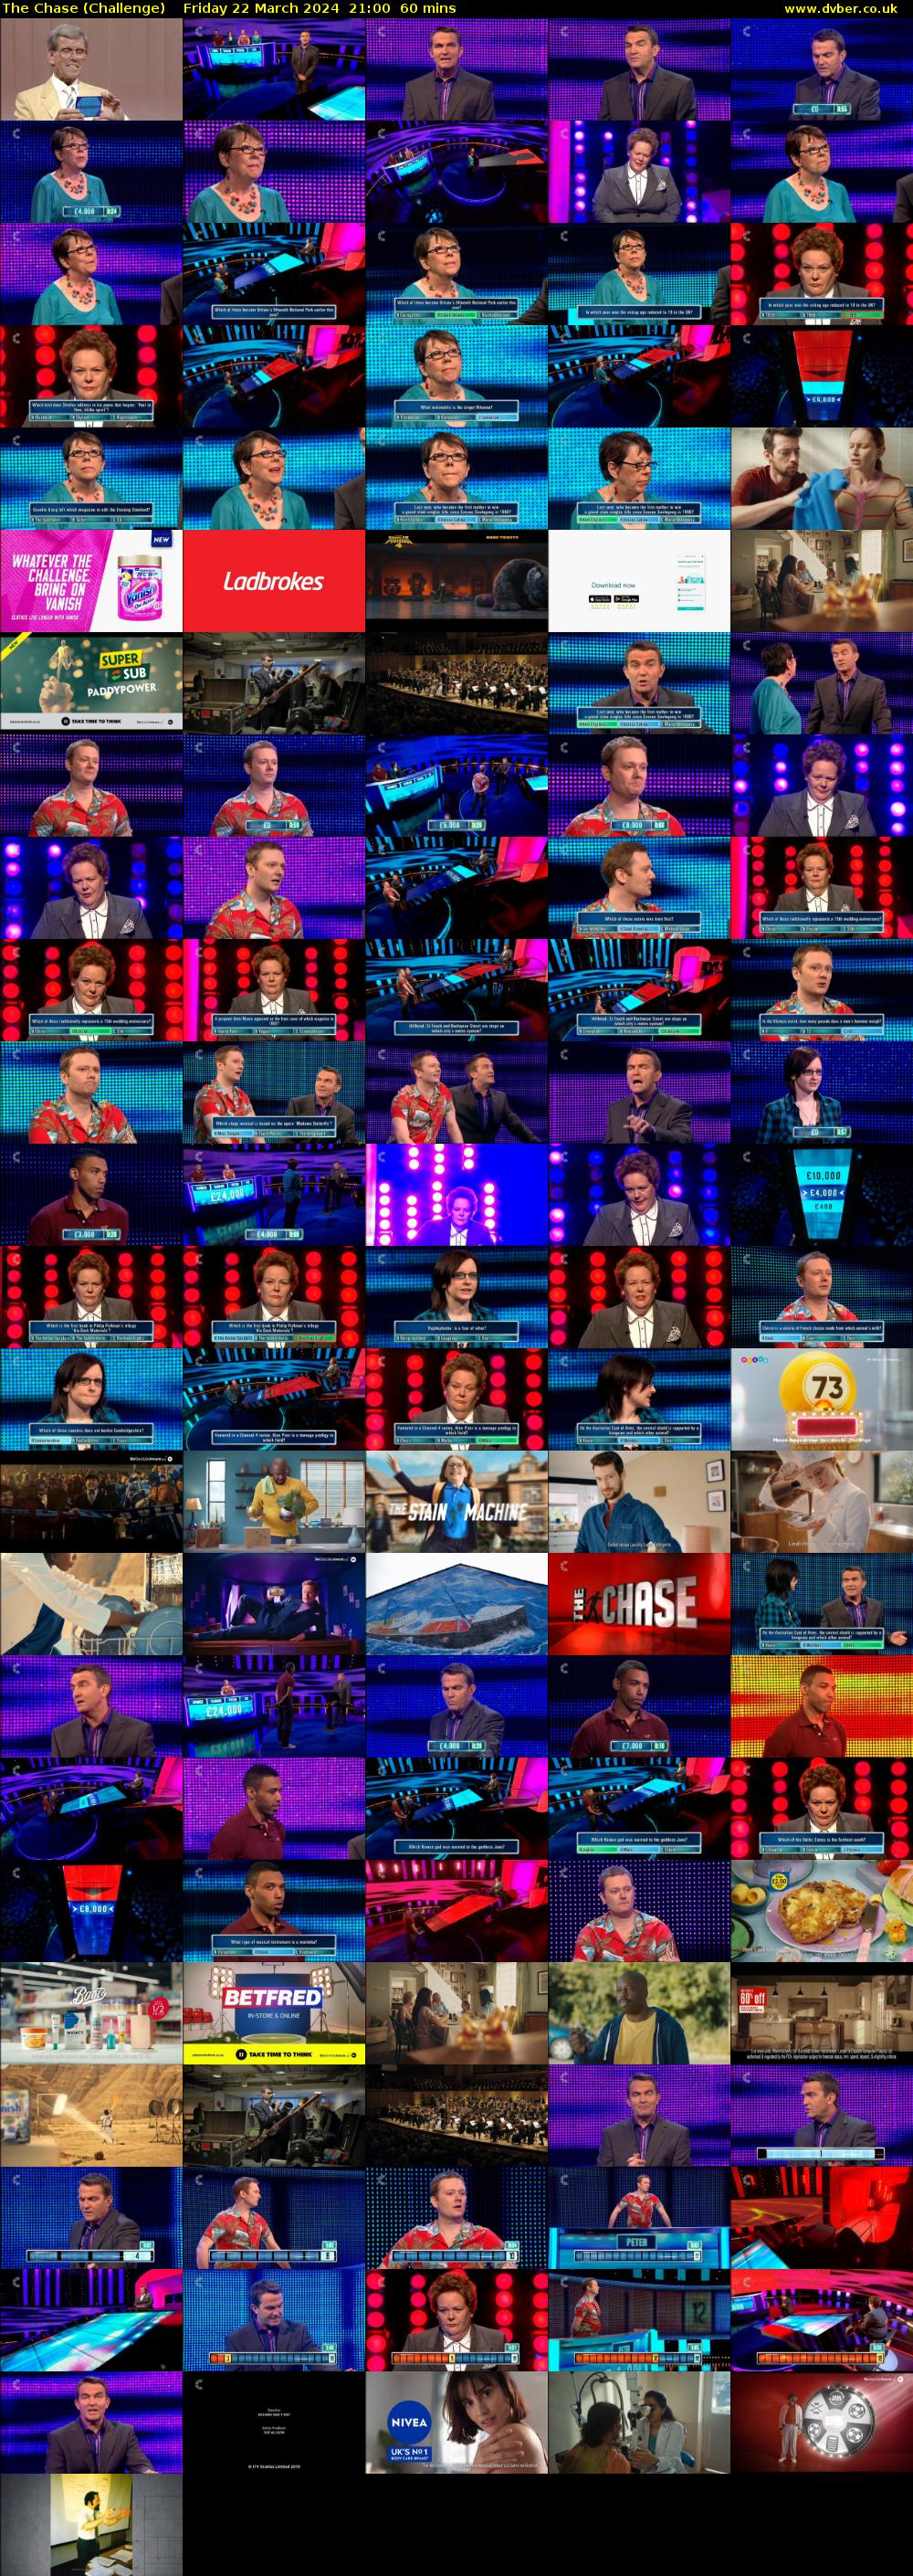 The Chase (Challenge) Friday 22 March 2024 21:00 - 22:00